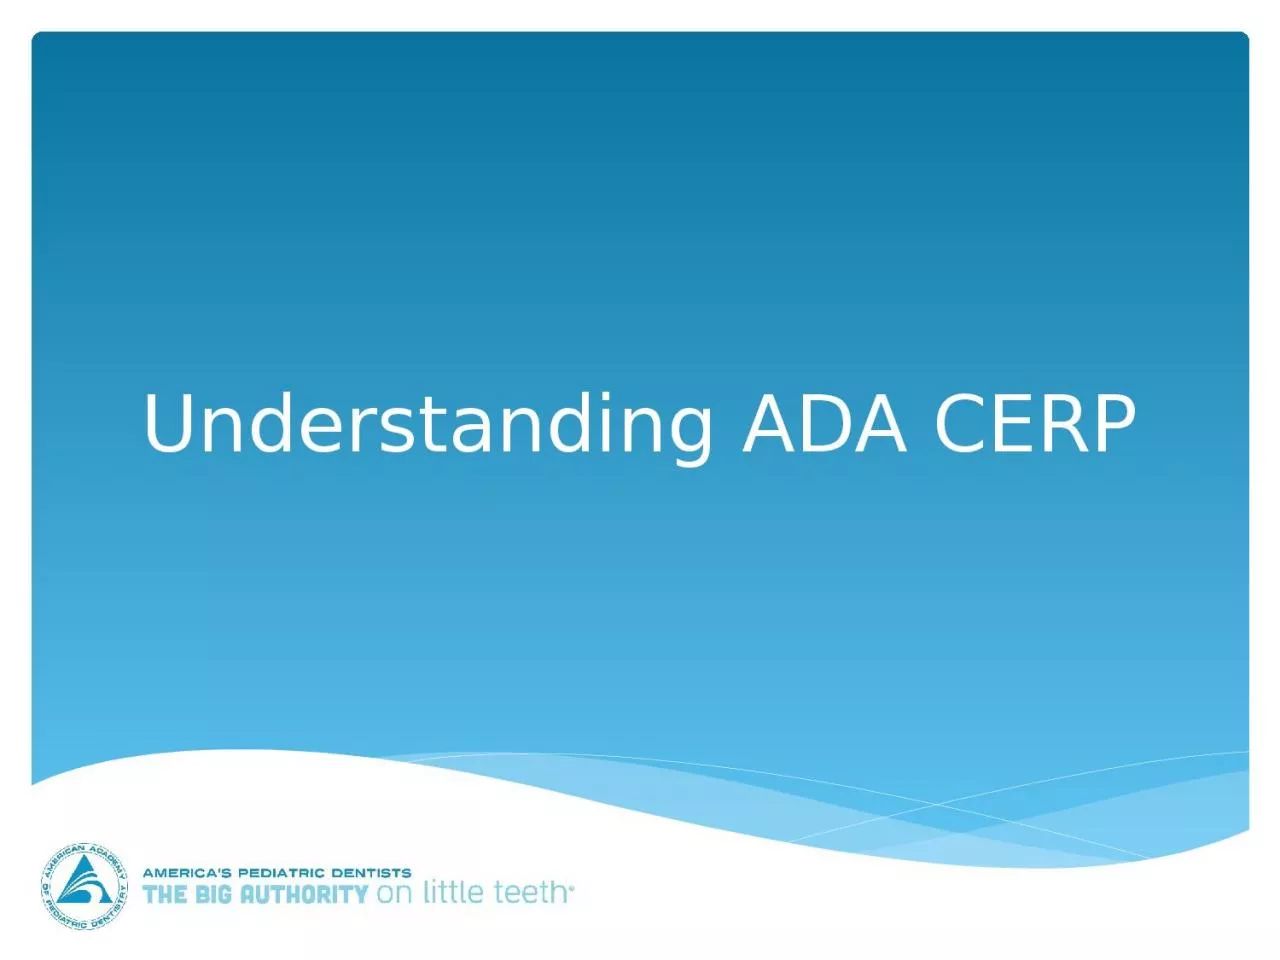 Understanding ADA CERP There is no such thing as ADA CERP credit for attending a continuing